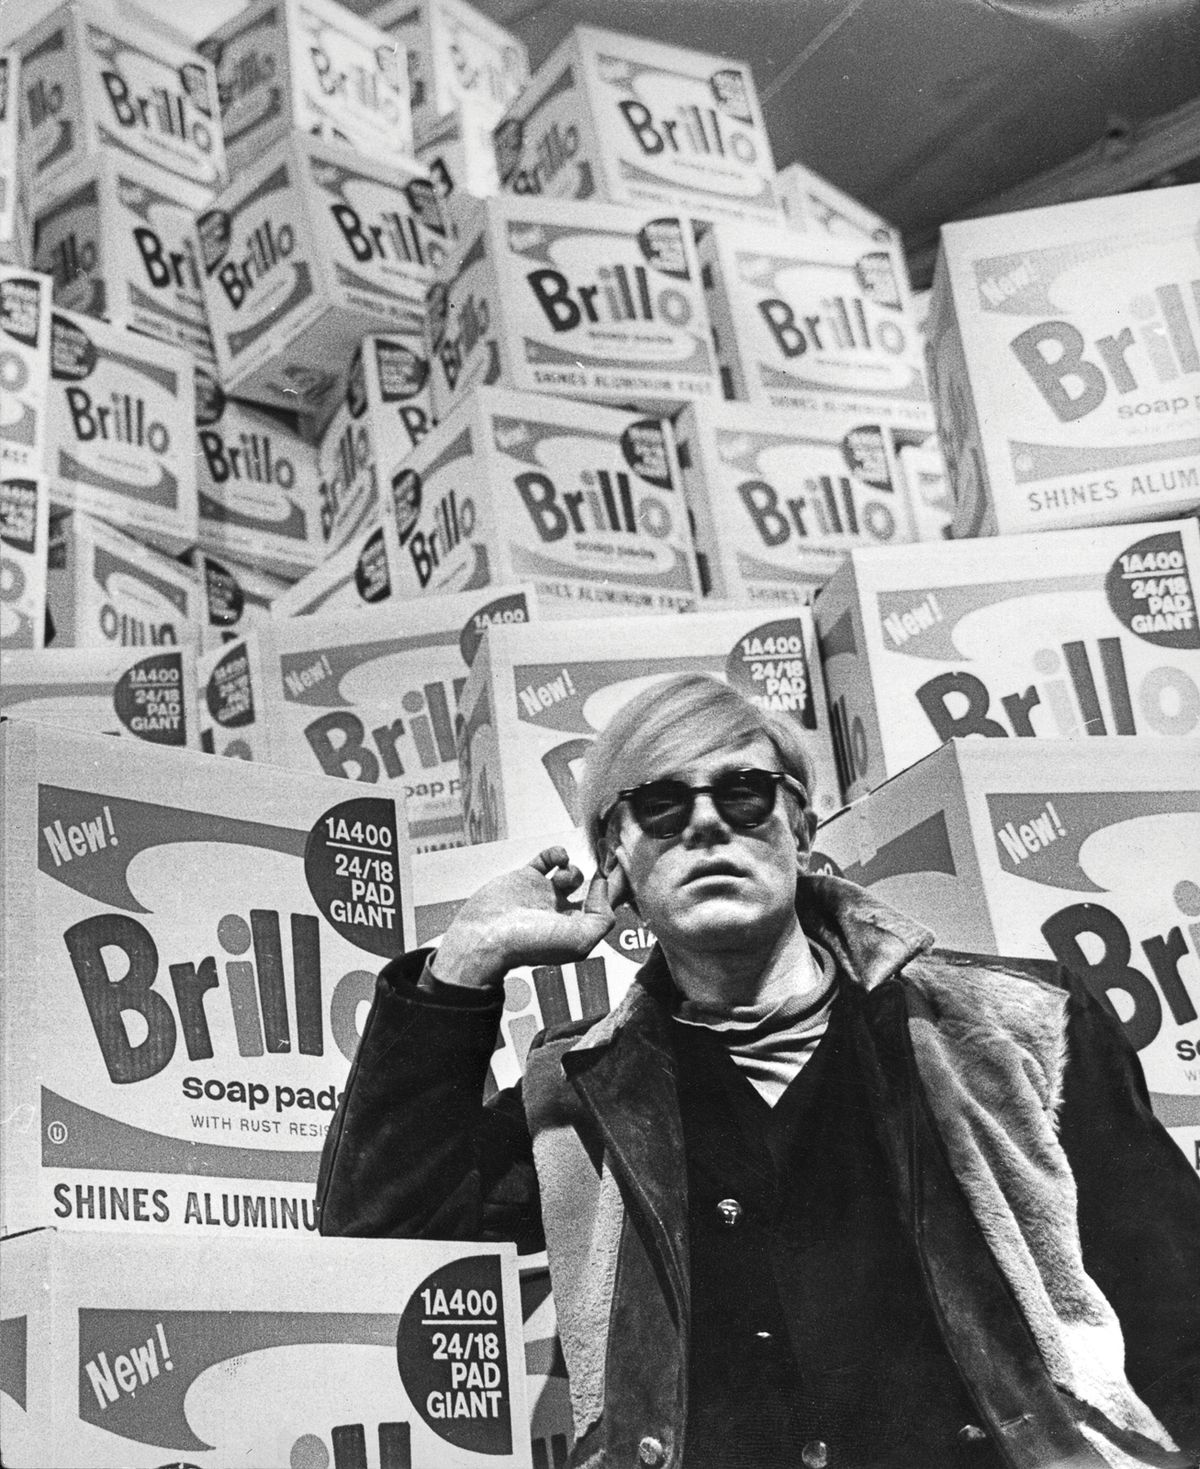 Andy Warhol at the Moderna Museet in 1968 with his original Brillo Boxes (1964) © 1968; Lasse Olsson/DN/Scanpix